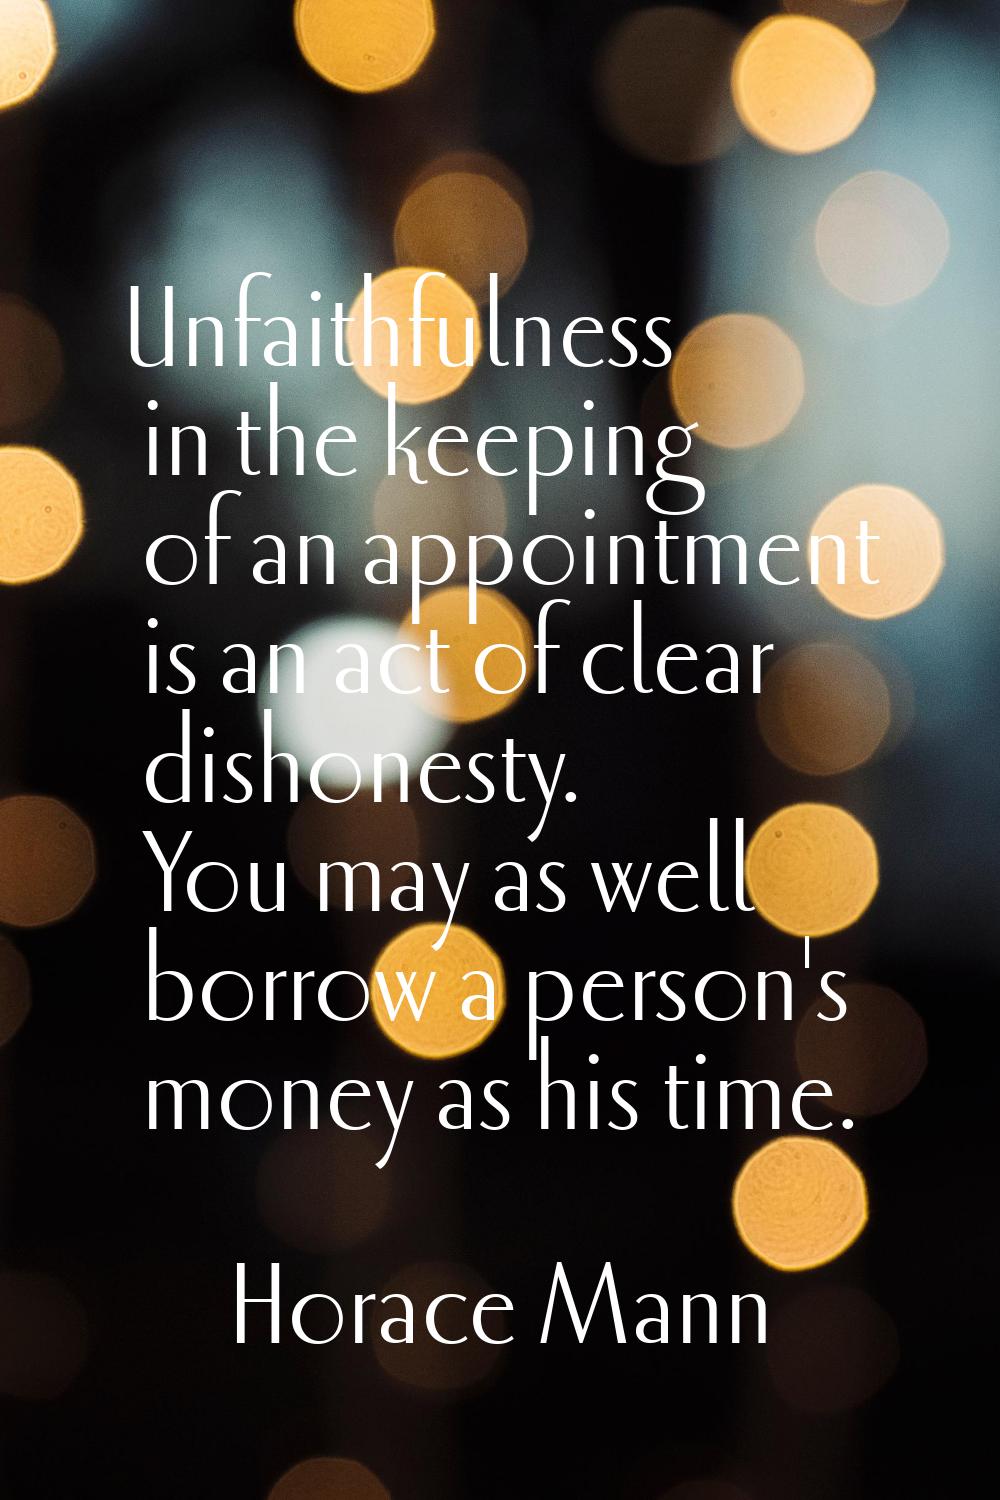 Unfaithfulness in the keeping of an appointment is an act of clear dishonesty. You may as well borr